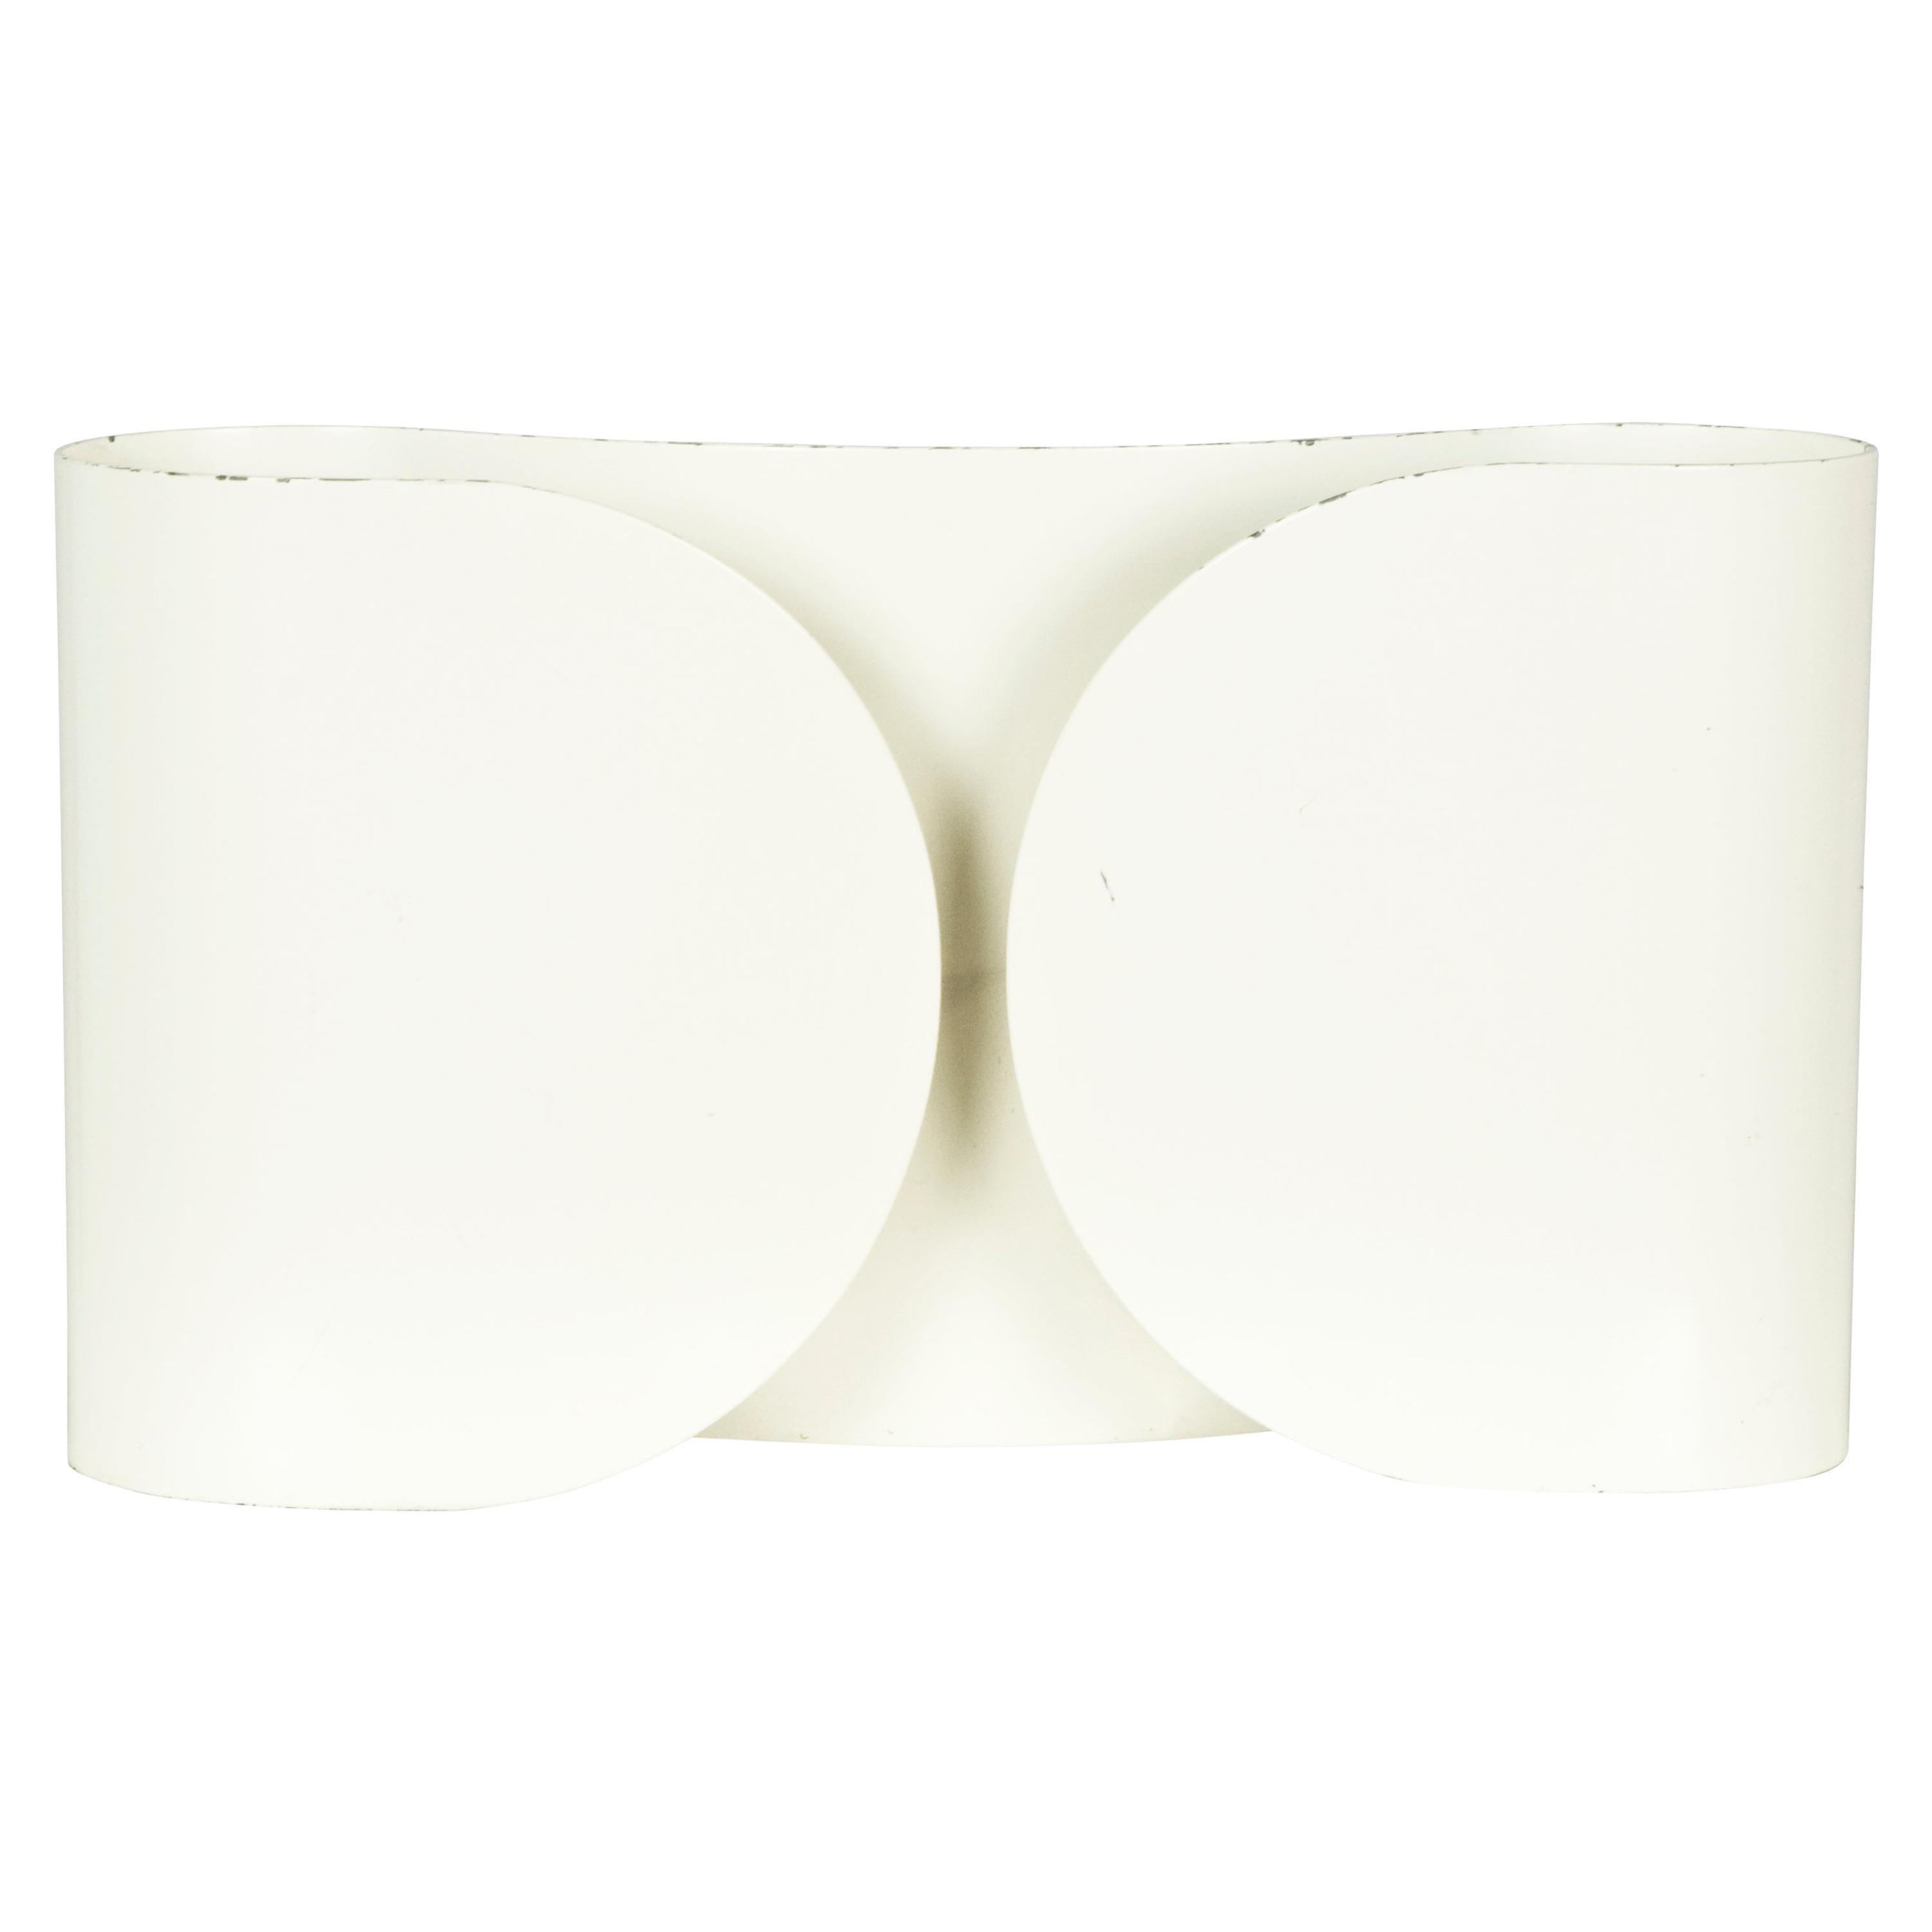 White Laquered Metal 2-Lights Sconce Foglio by Afra Tobia Scarpa for Flos, 1966 For Sale